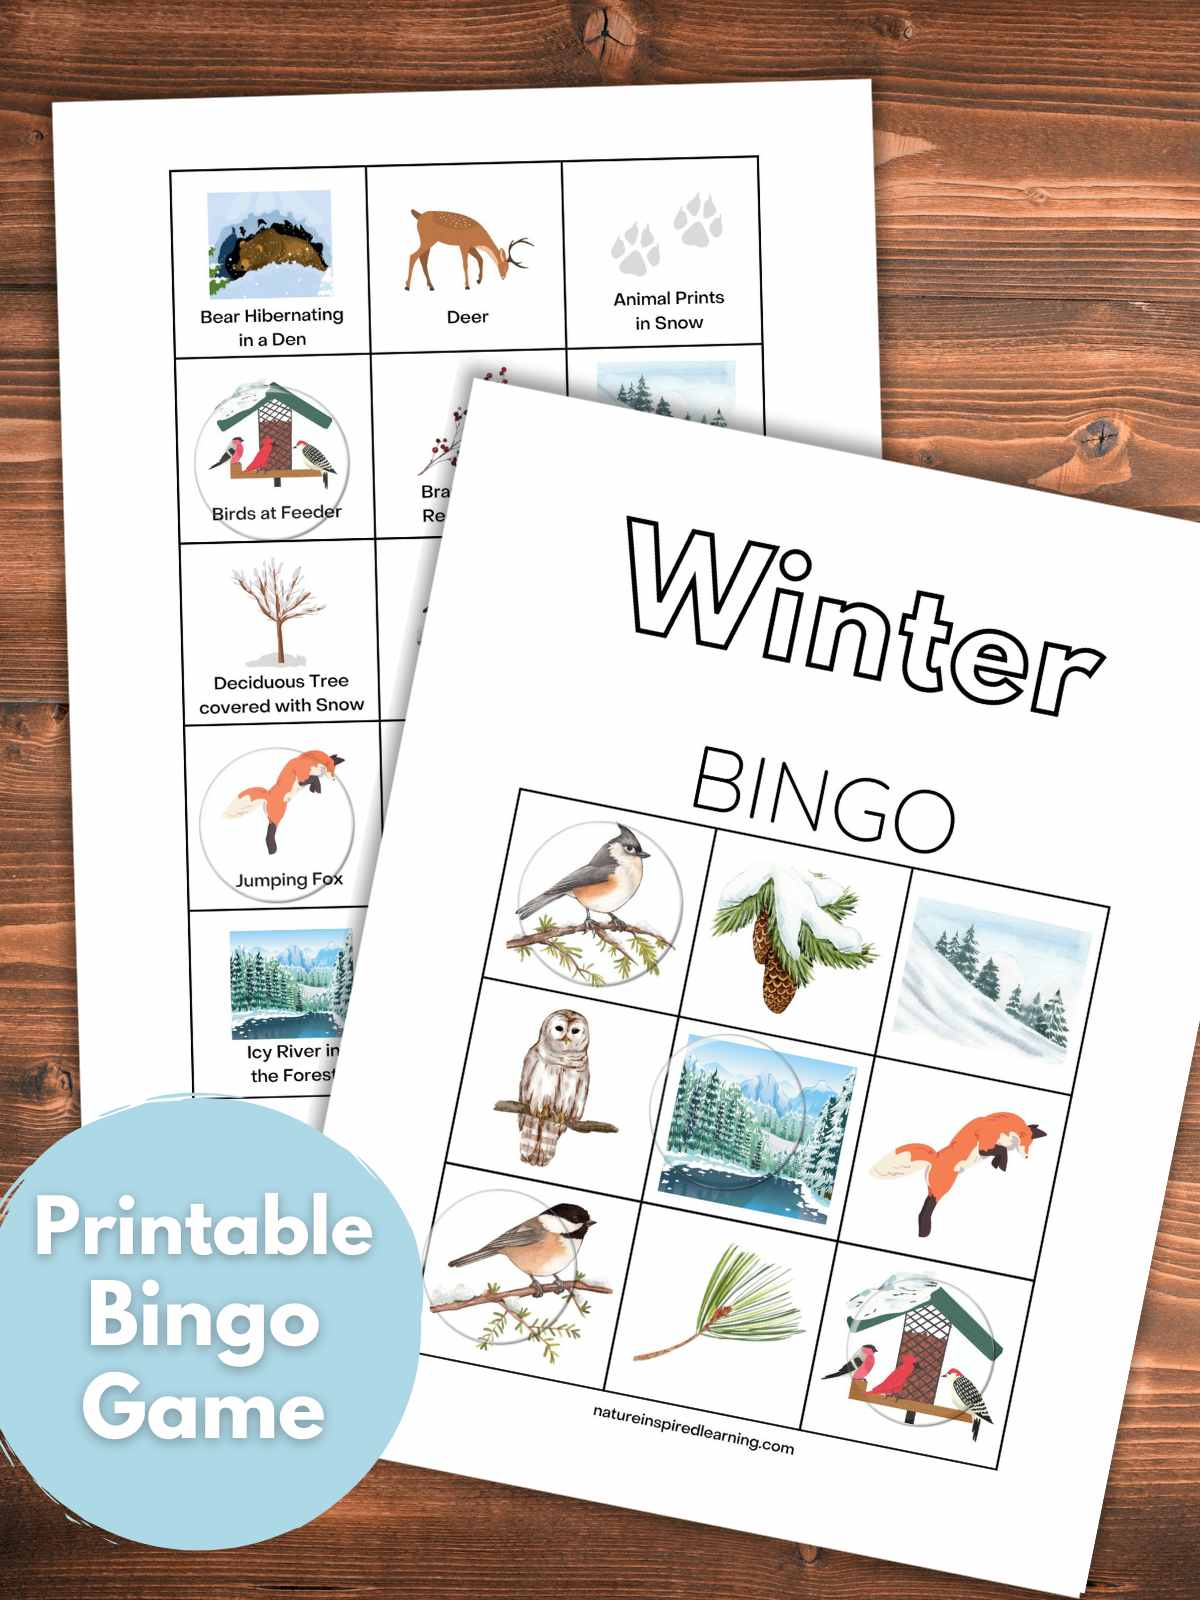 Printable bingo card with winter designs on top of the calling cards on a wooden background with a light blue circle bottom left with text overlay